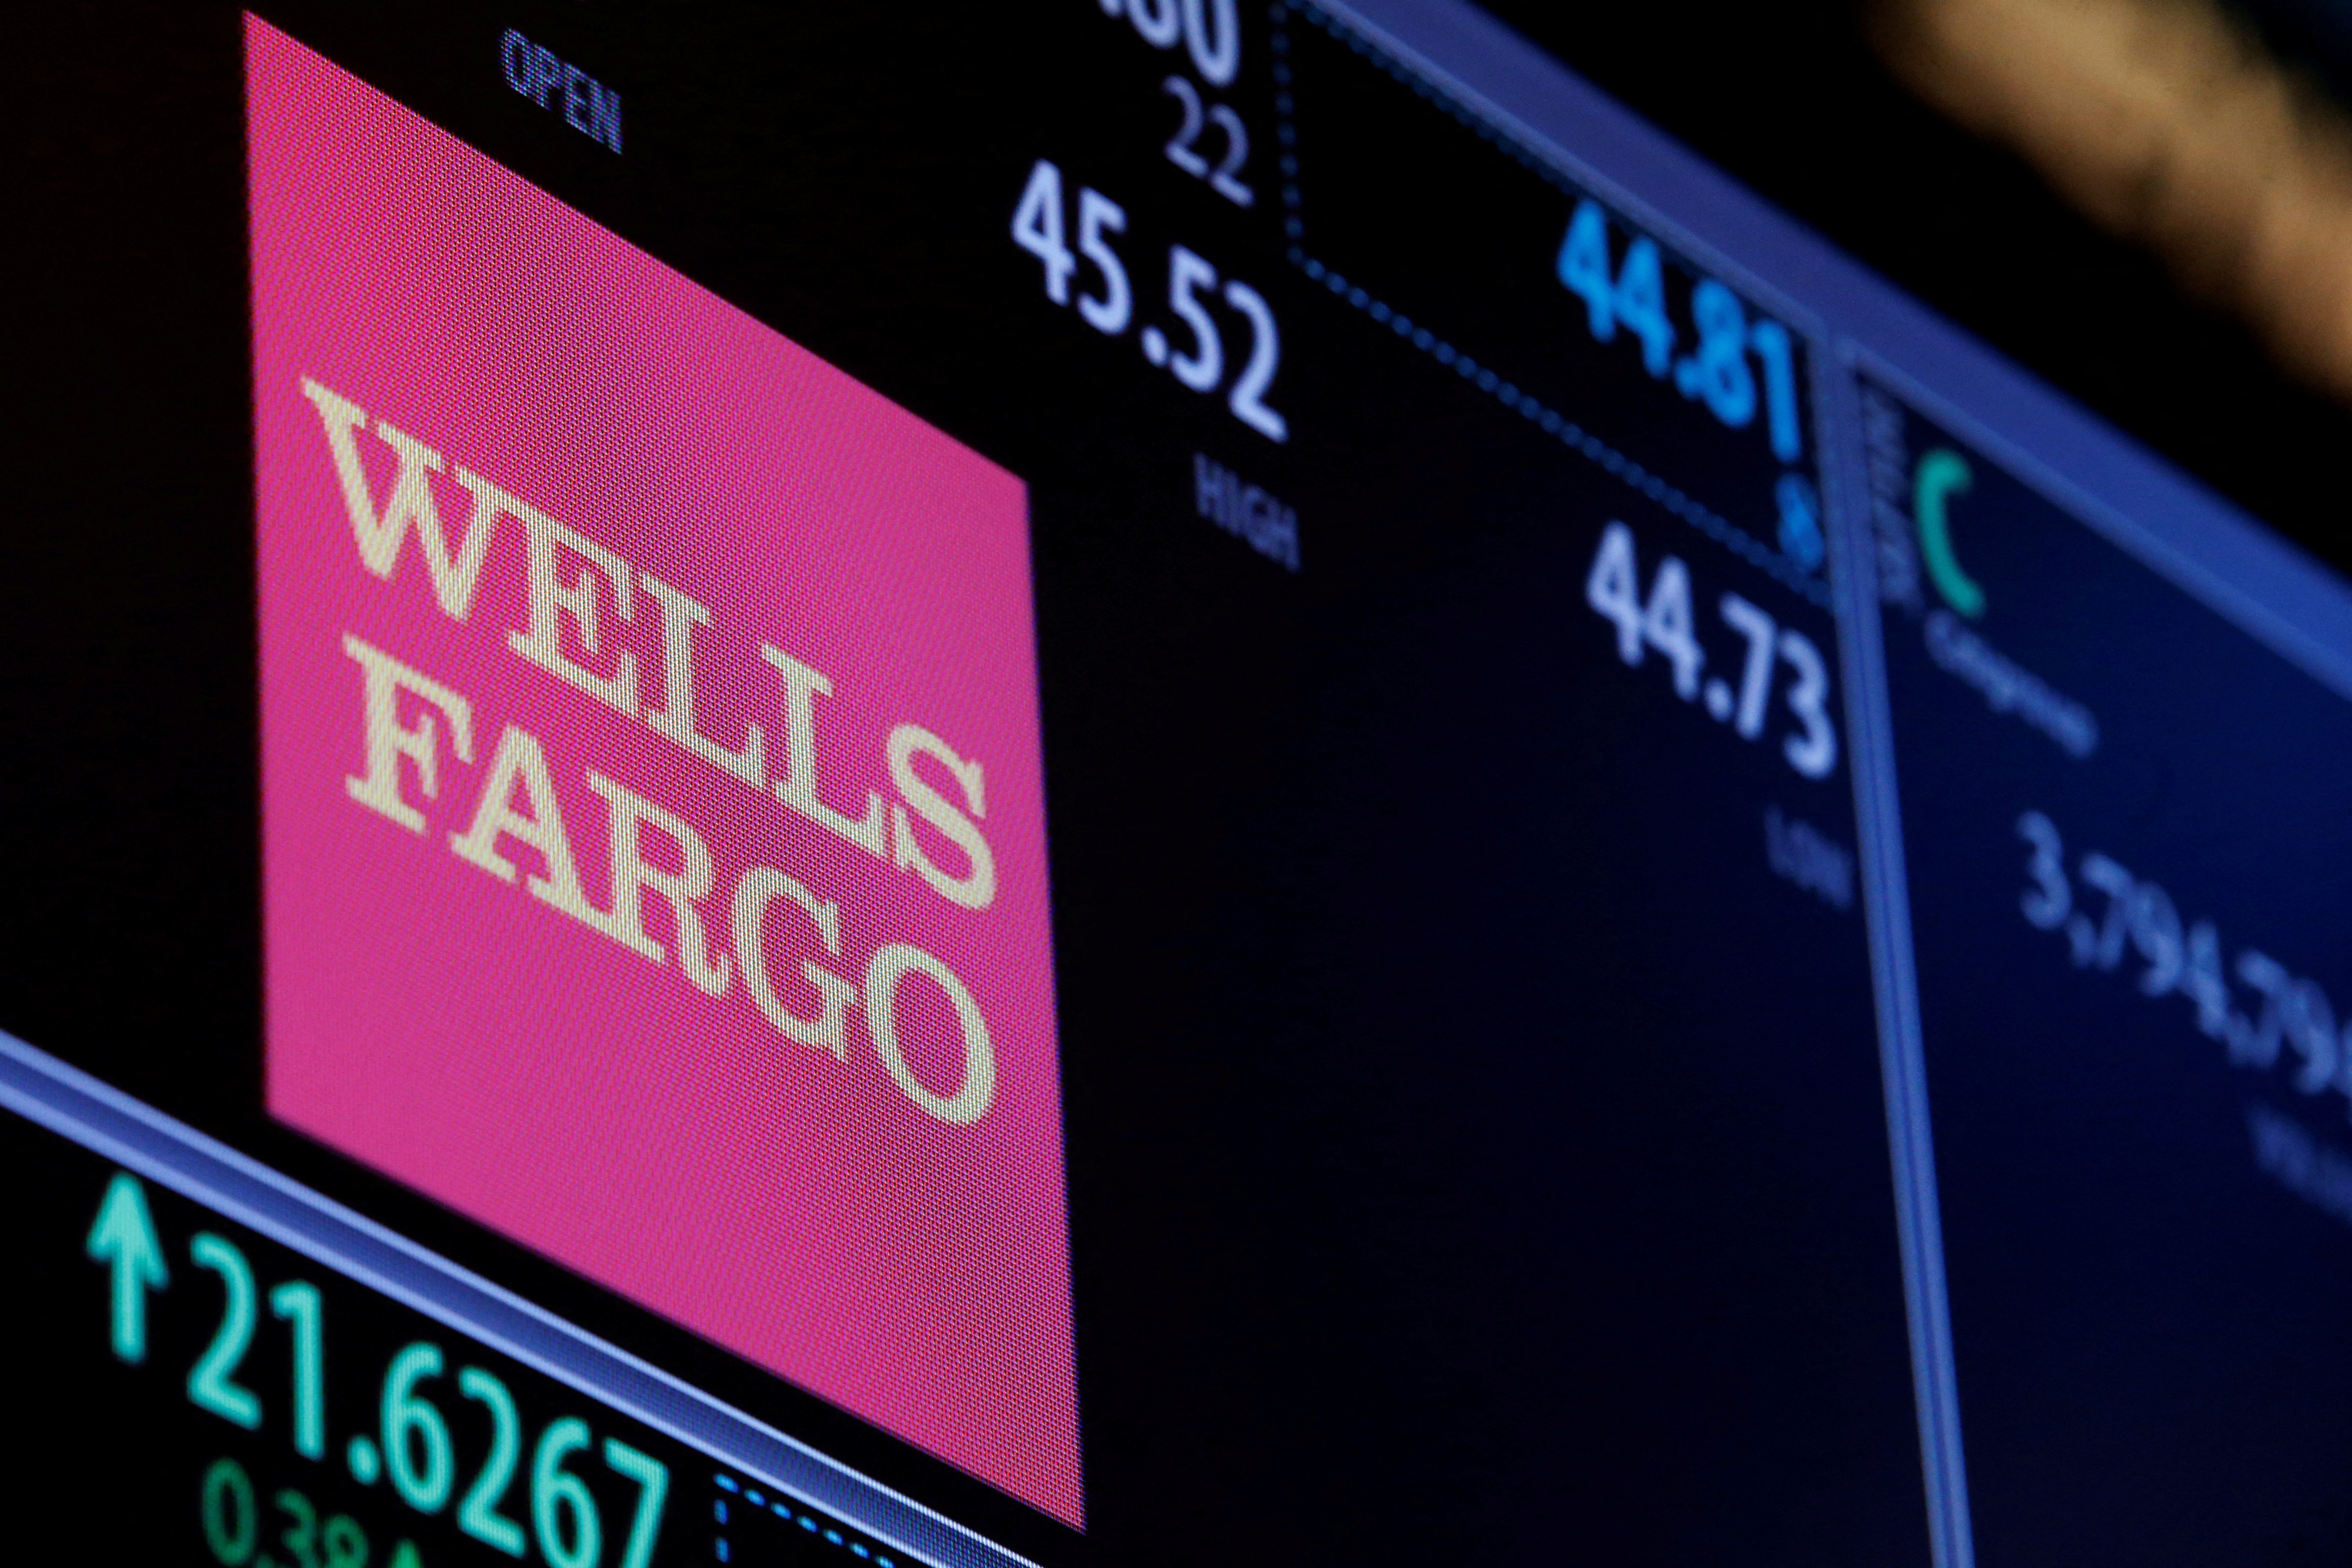 The logo and trading information for Wells Fargo are displayed on a screen on the floor of the NYSE